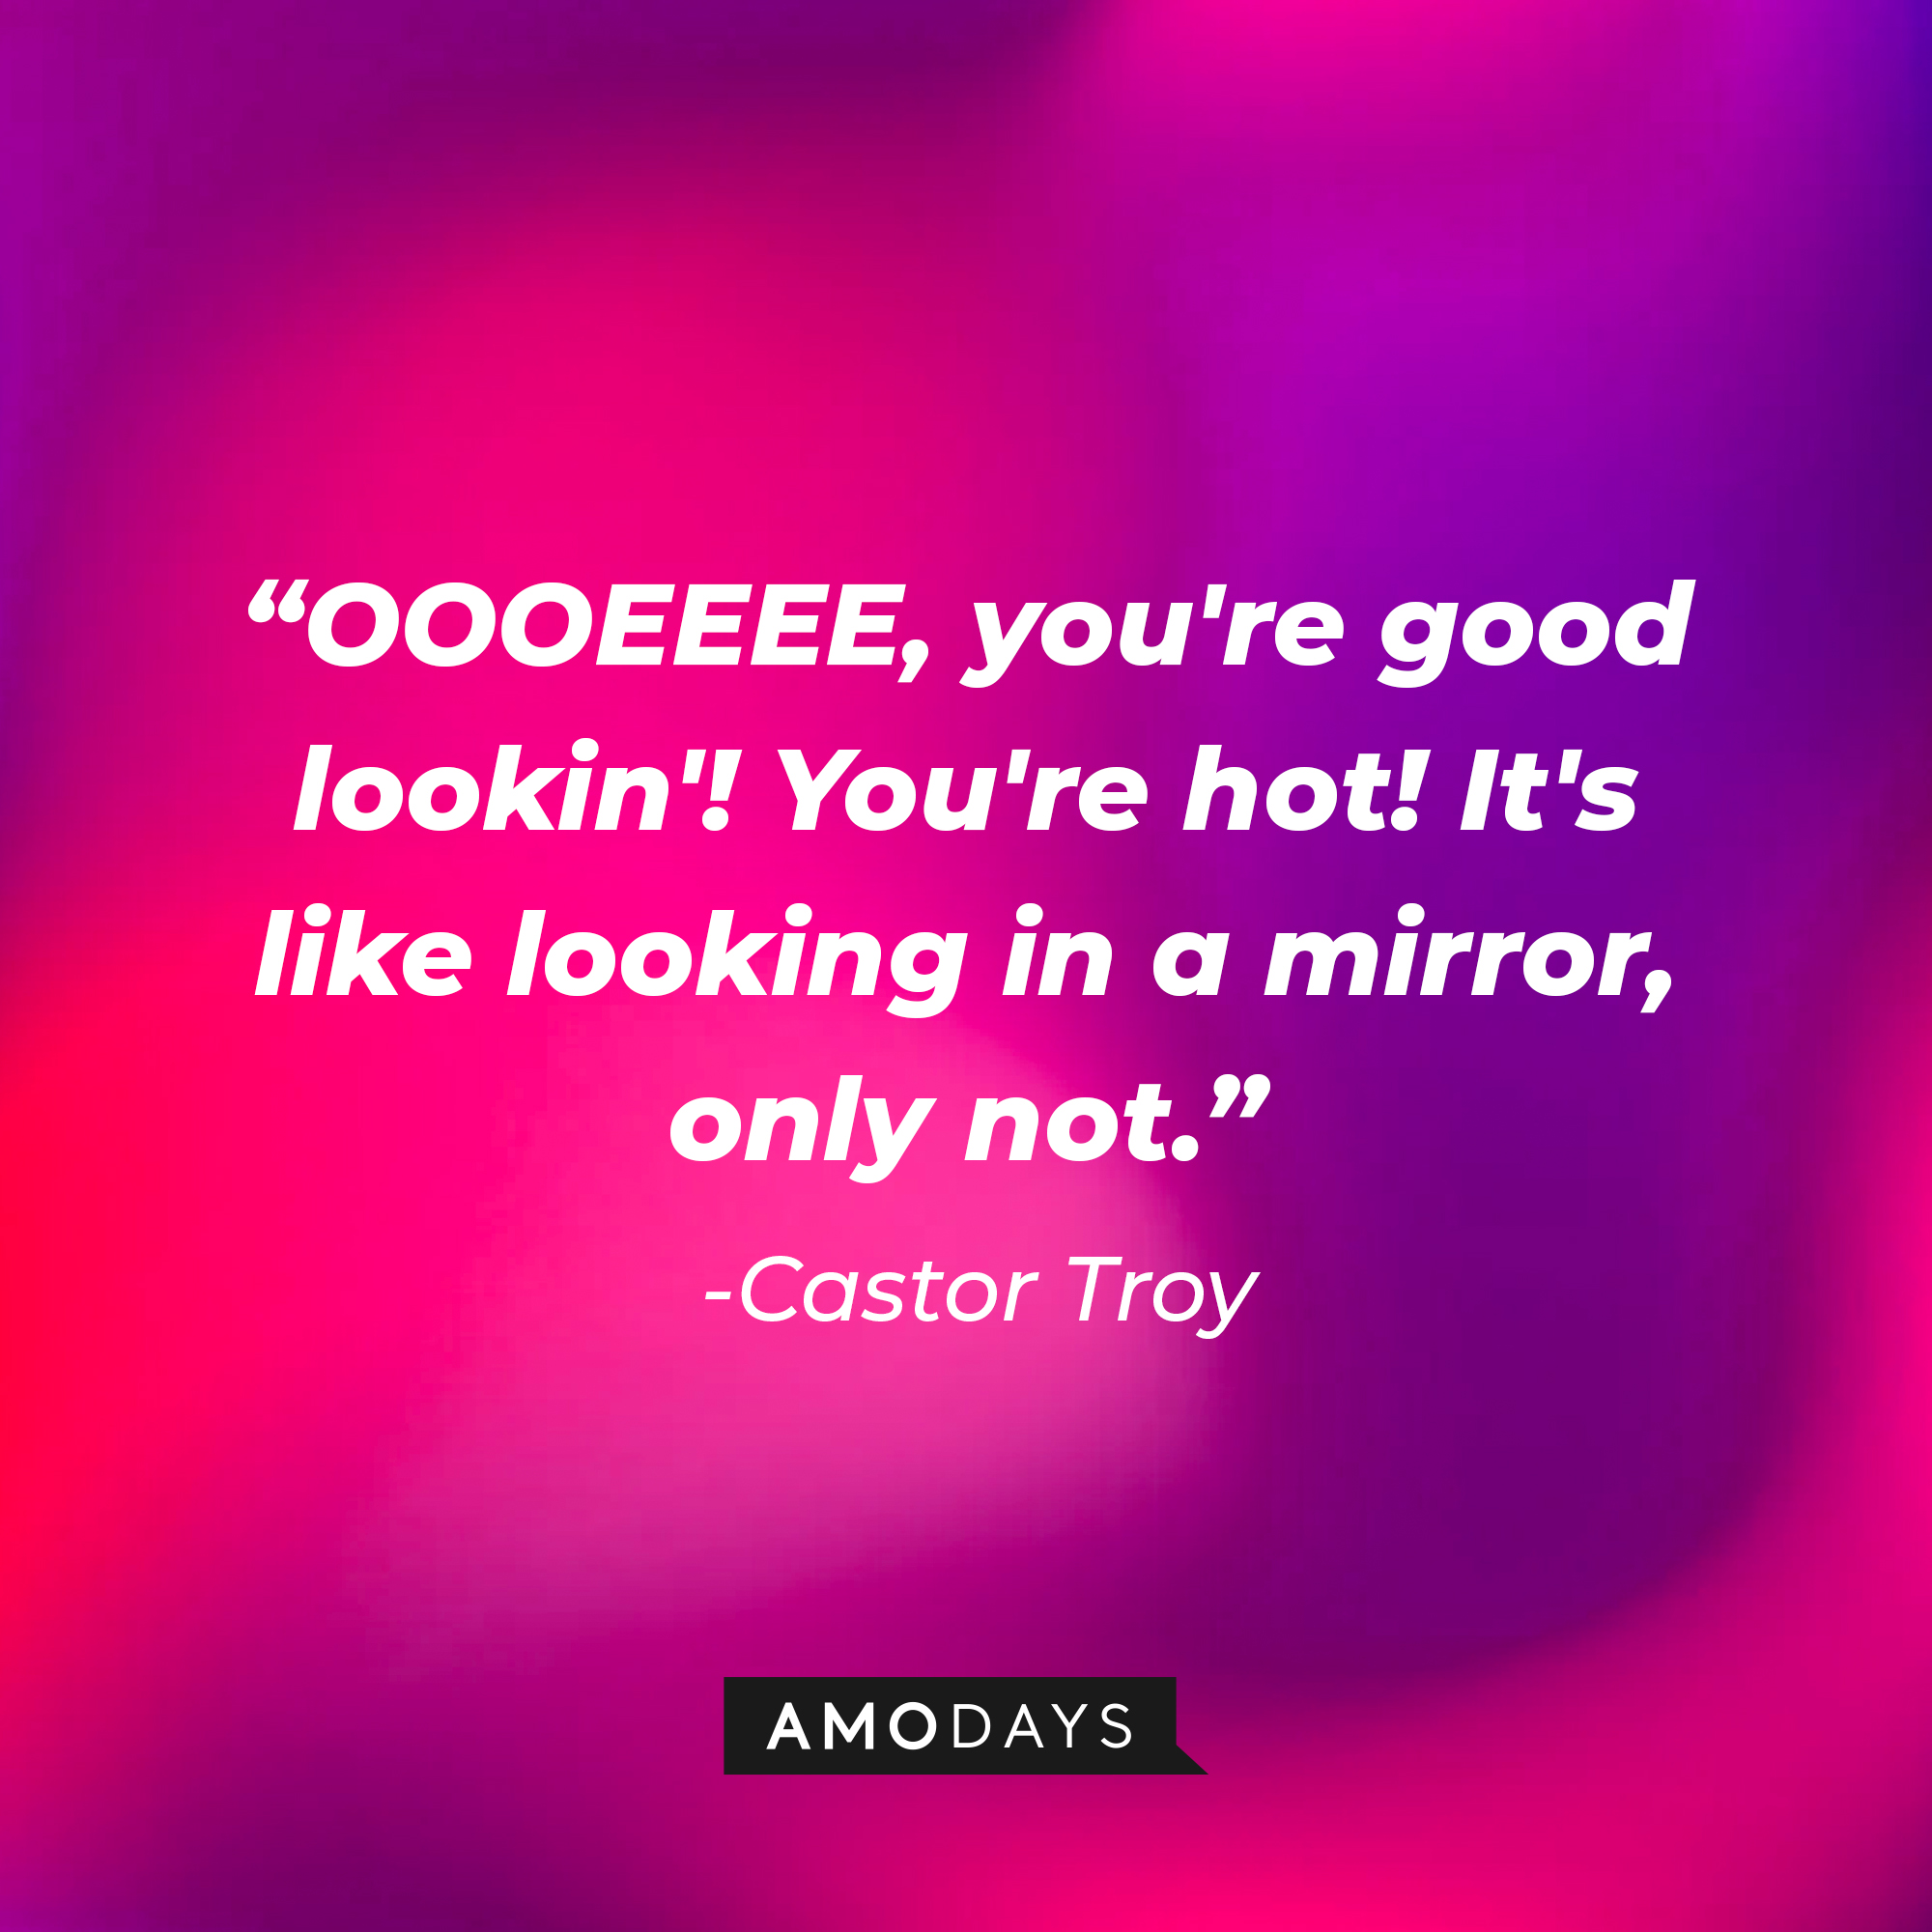 Castor Troy's quote: “OOOEEEE, you're good lookin'! You're hot! It's like looking in a mirror, only not.” : Source: Amodays